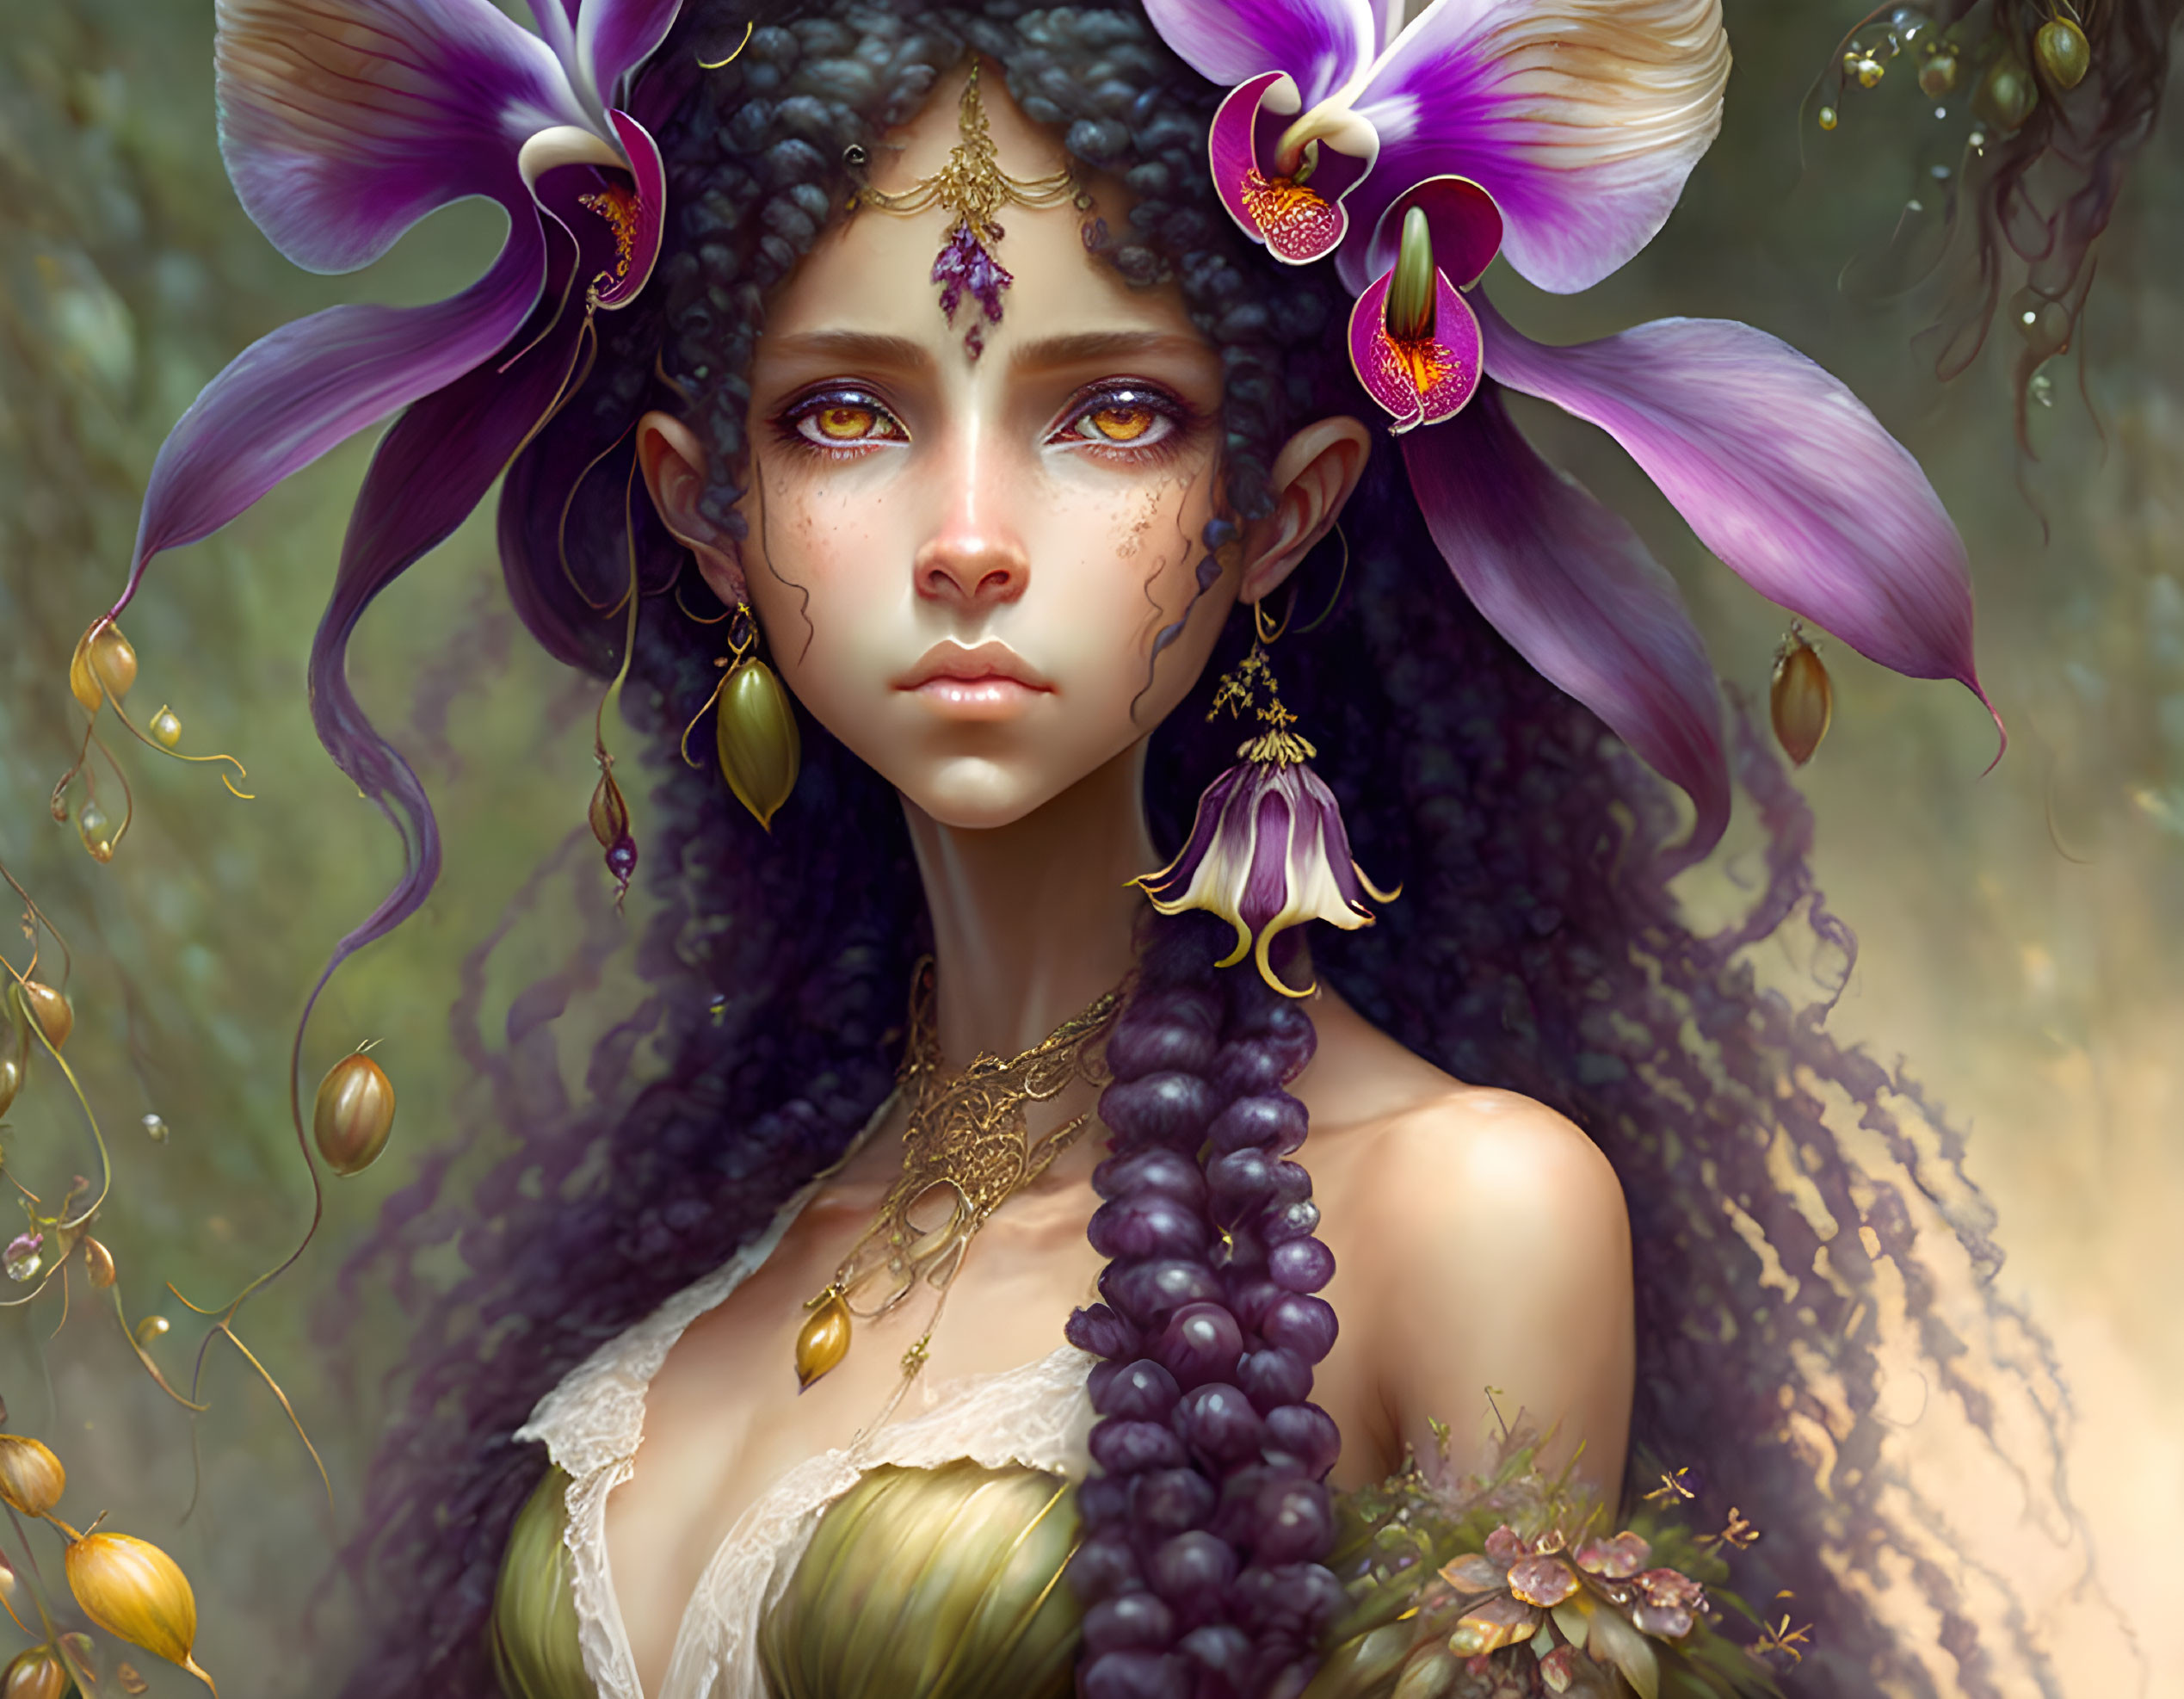 The Orchid Girl